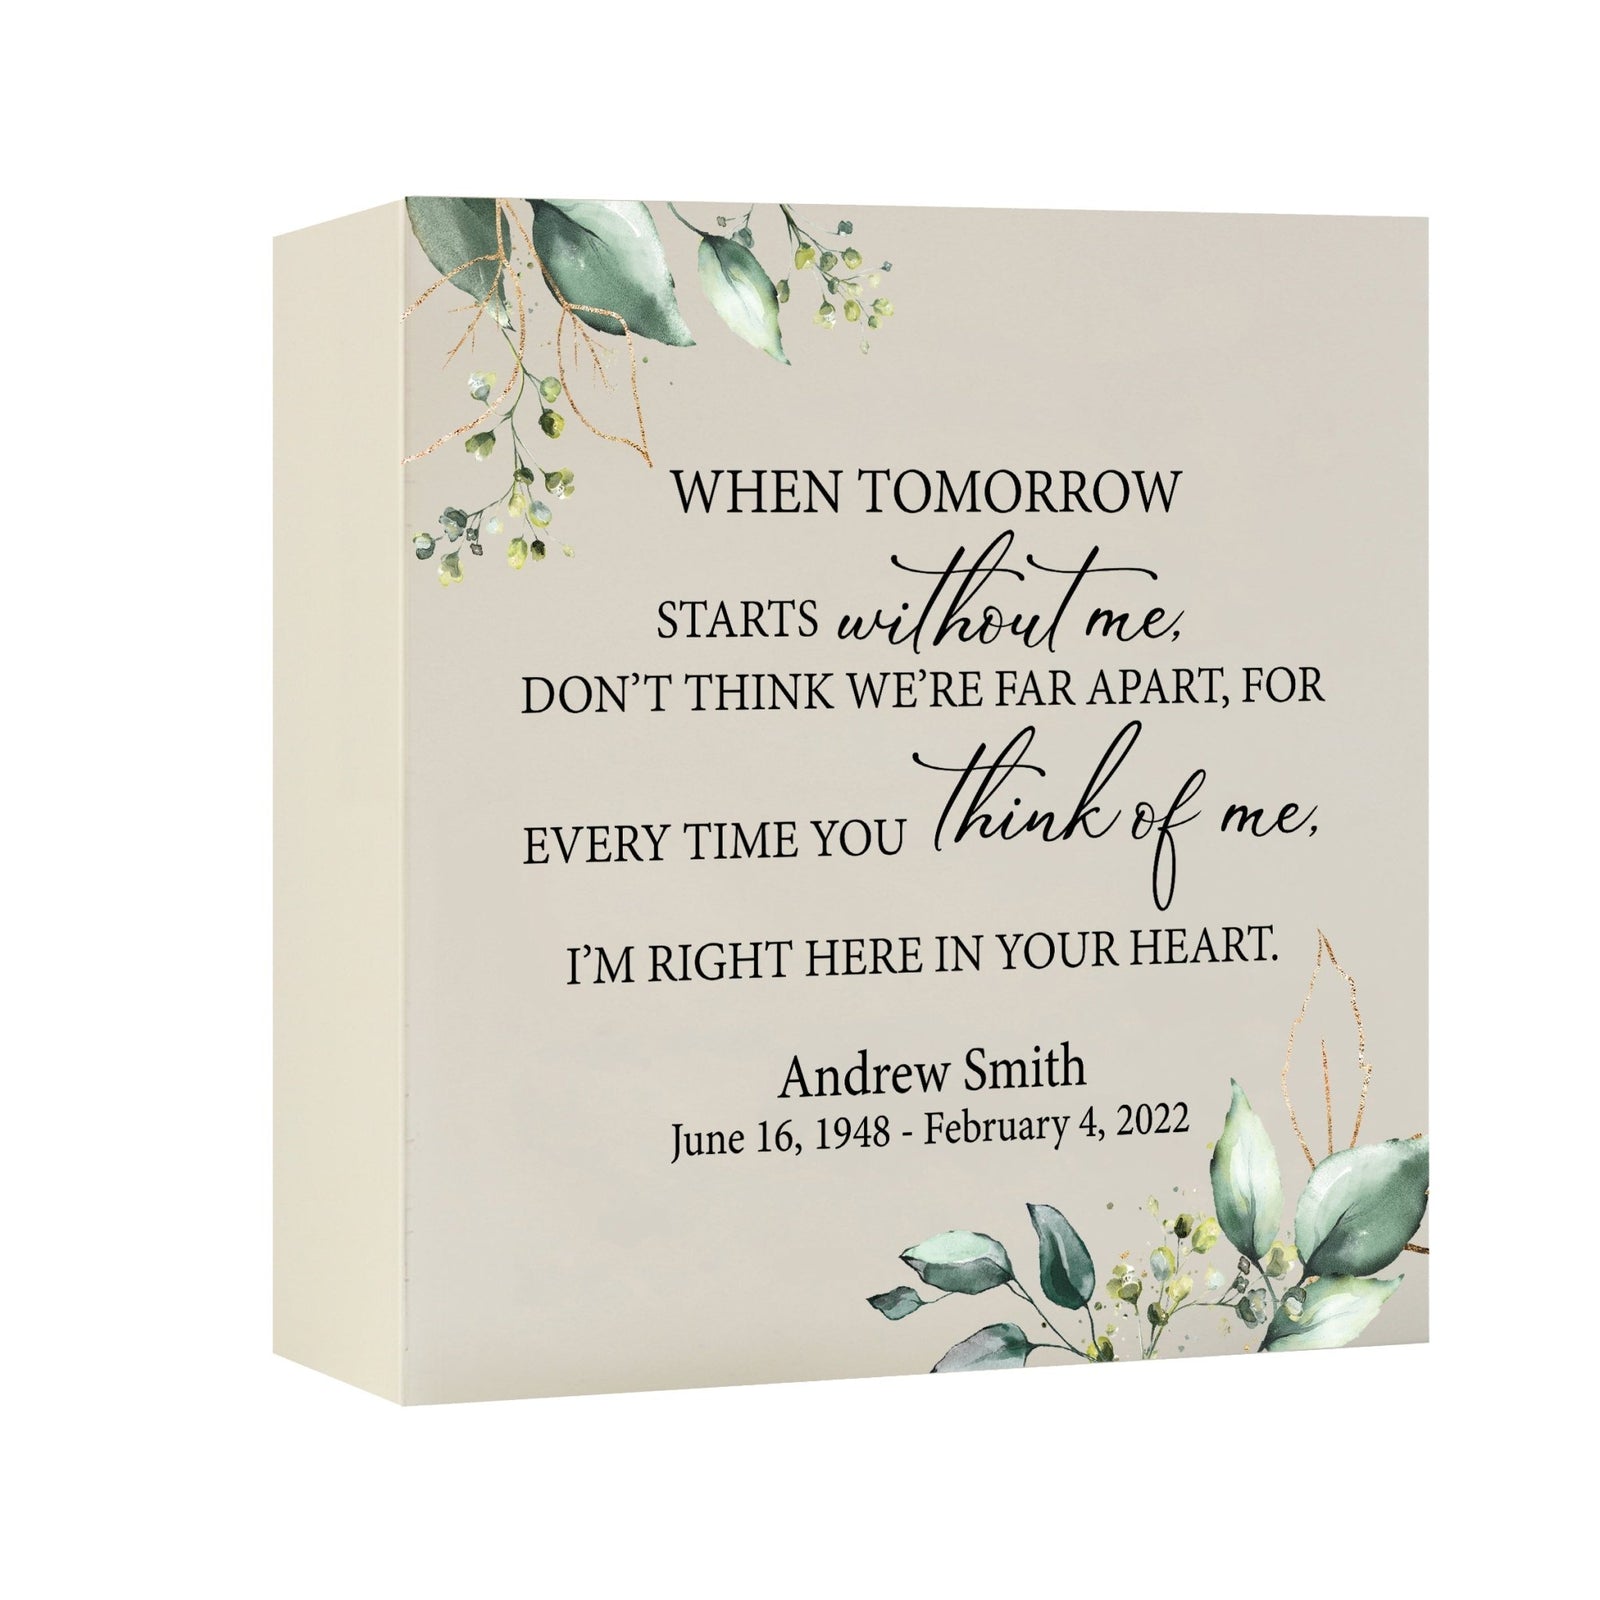 Timeless Human Memorial Shadow Box Urn With Inspirational Verse in Ivory - When Tomorrow Starts - LifeSong Milestones